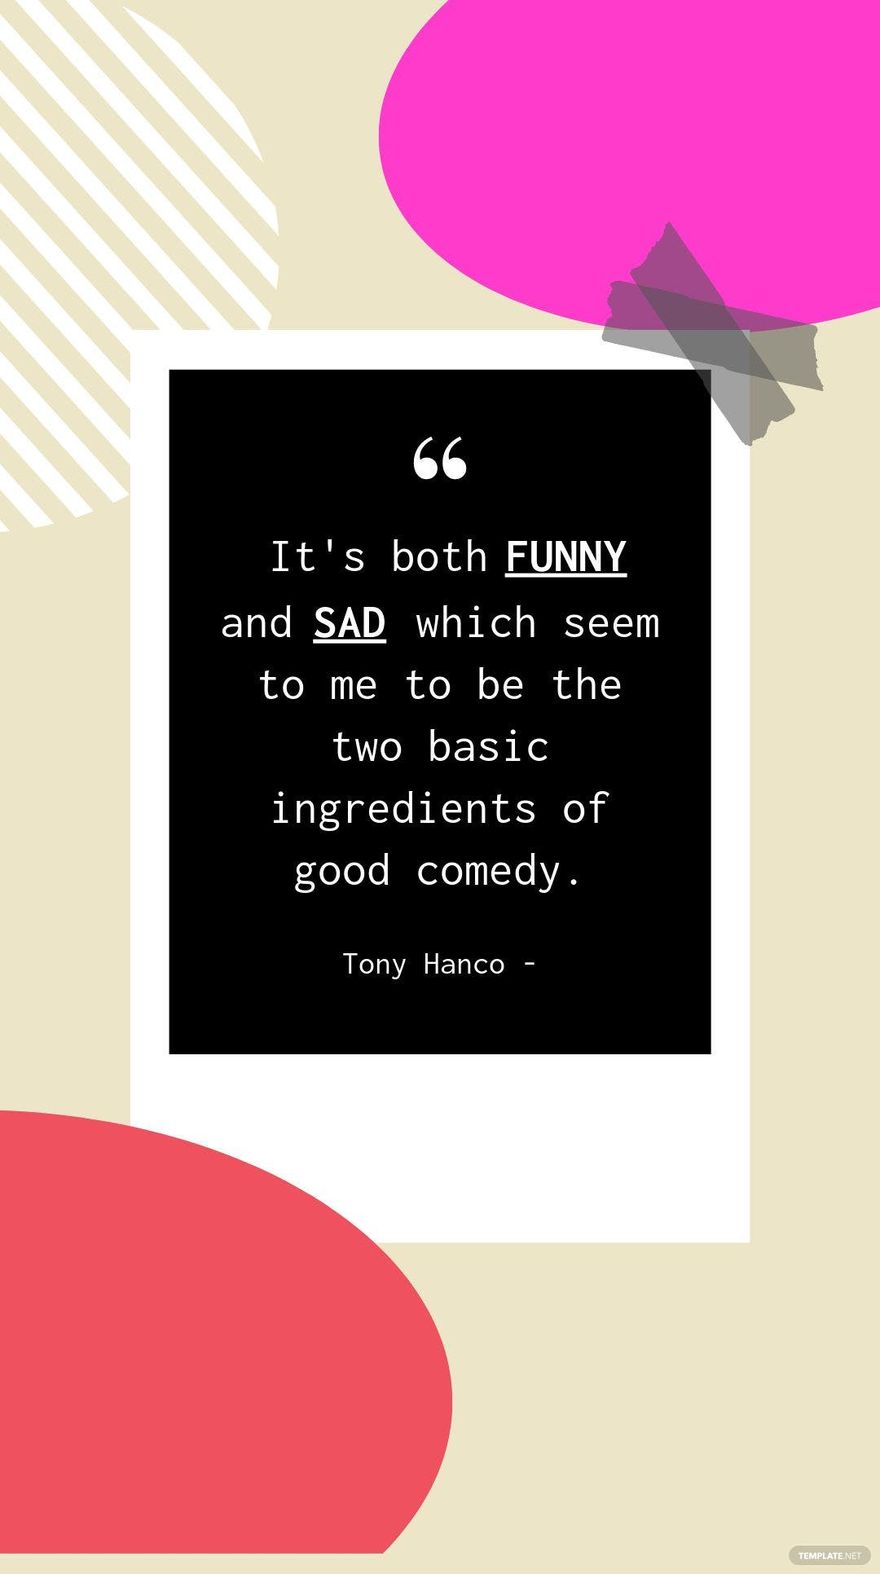 Tony Hanco - It's both funny and sad which seem to me to be the two basic ingredients of good comedy.